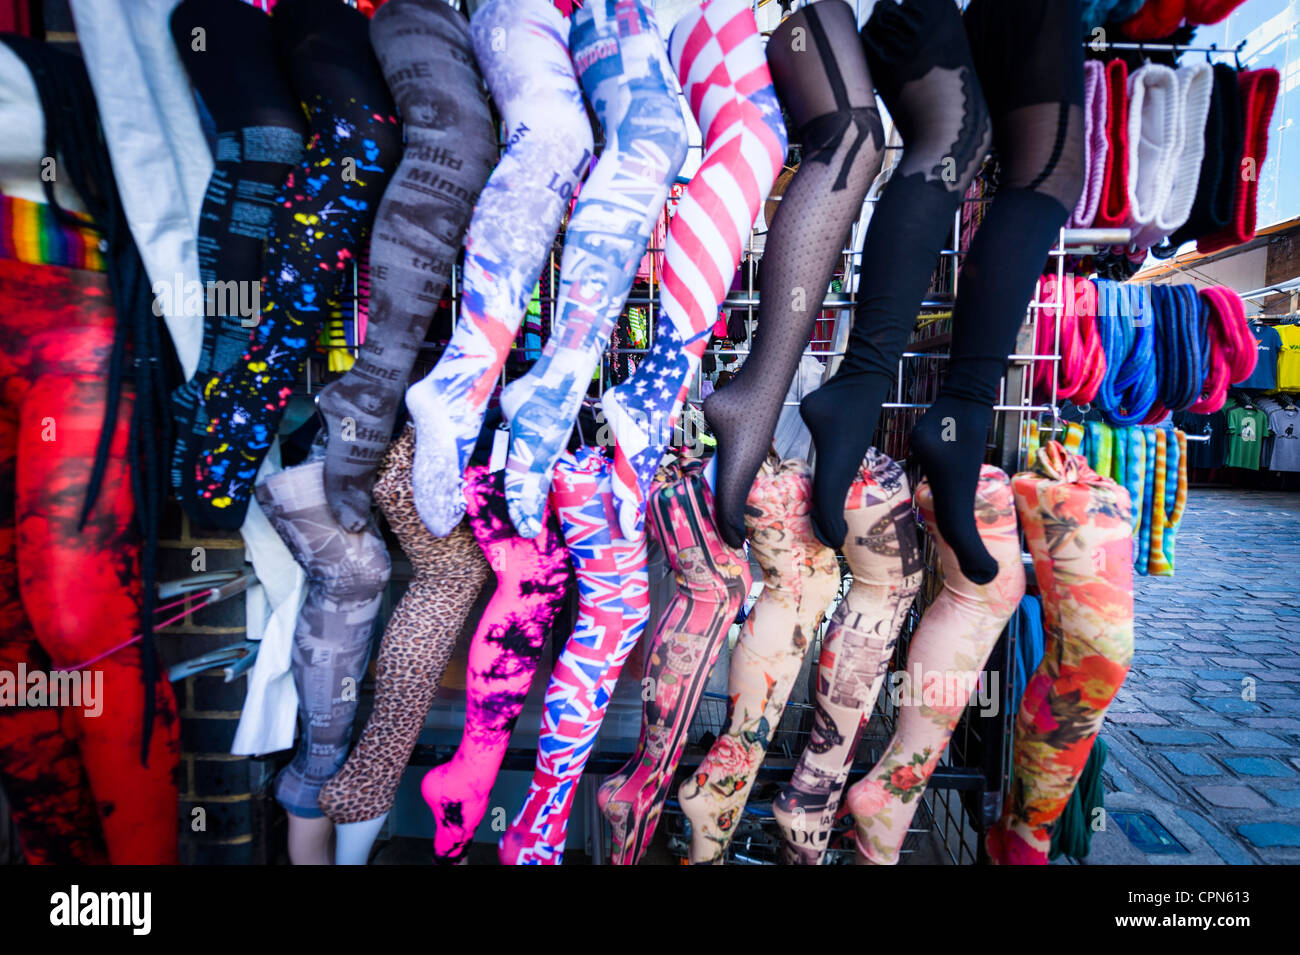 London Camden Town Lock Market Stables display of multi colored colorful coloured colourful tights stockings pantyhose hosiery cobble cobbles Stock Photo